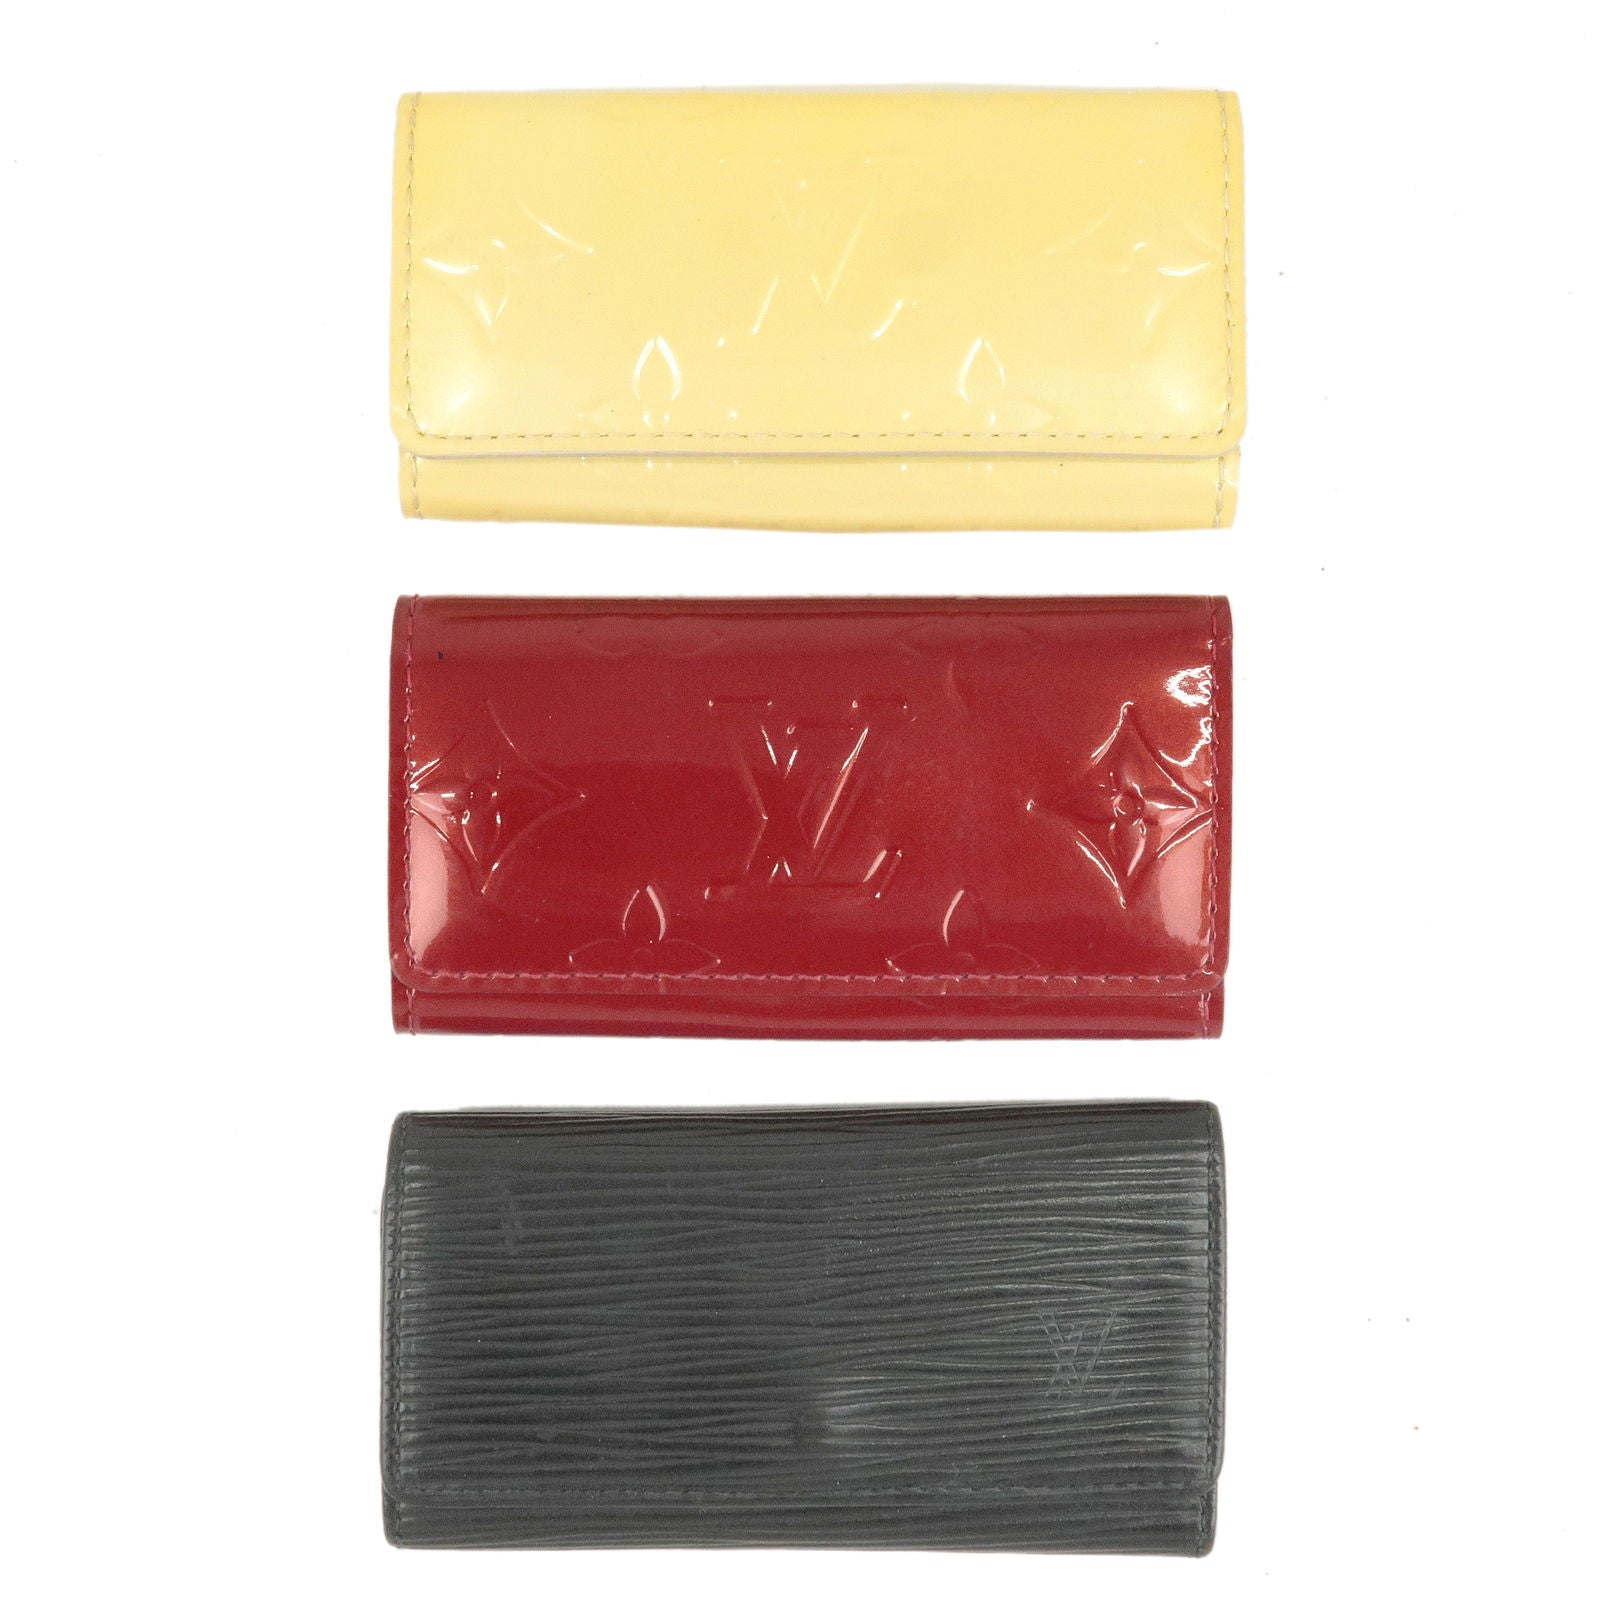 Louis Vuitton Multicles Vernis Leather Key Holder